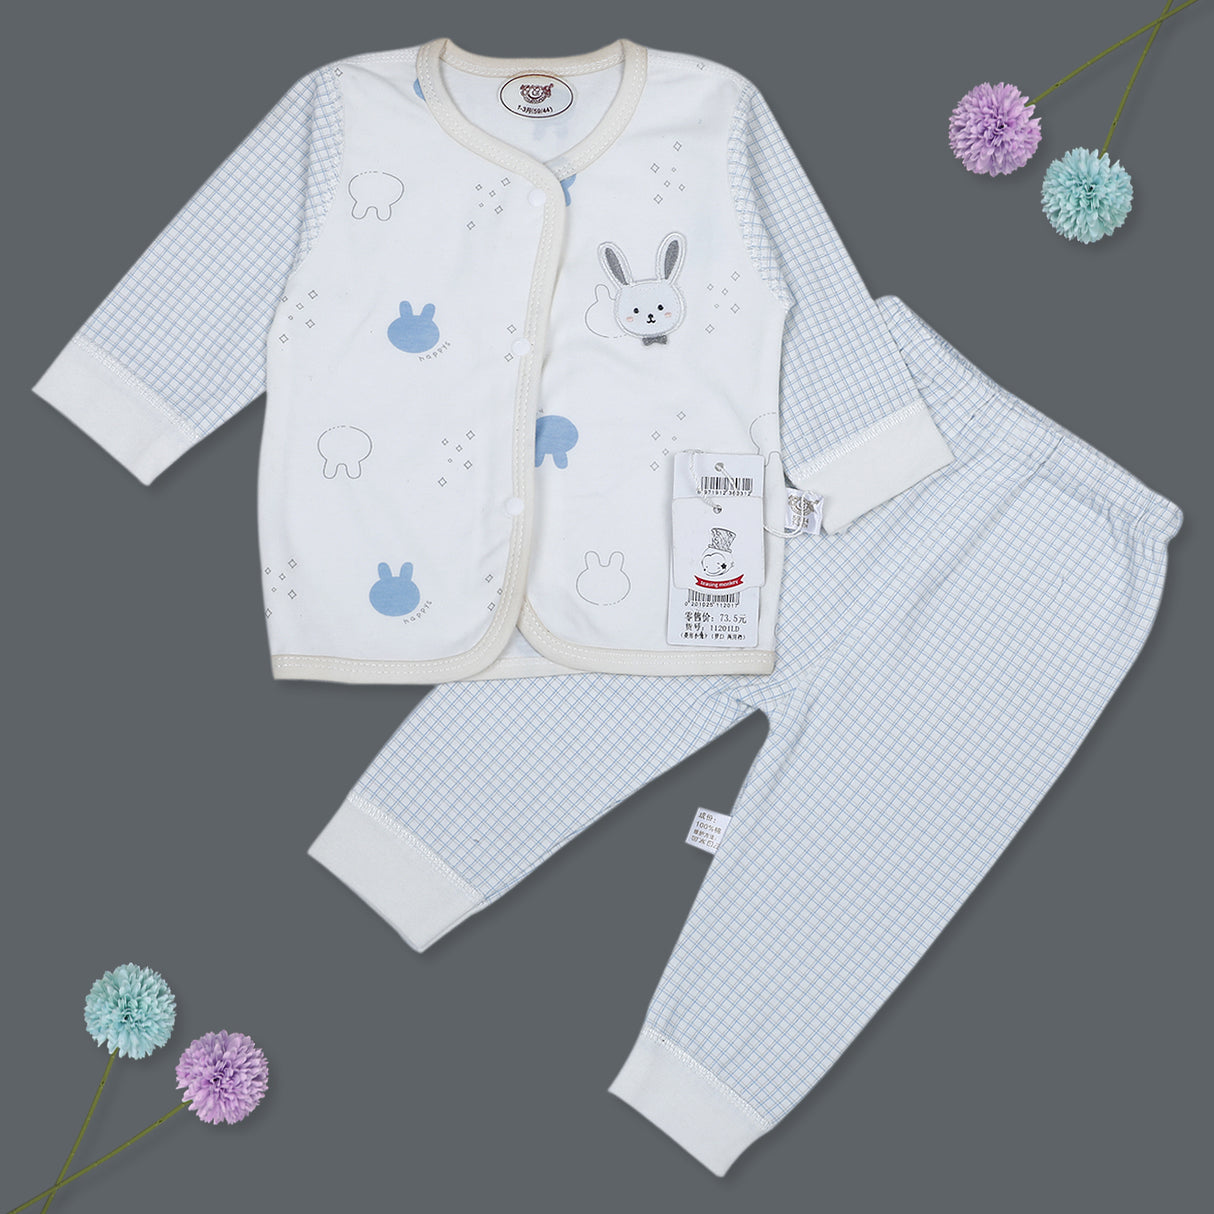 Bunny Printed Full Sleeves Top And Pyjama Buttoned Night Suit